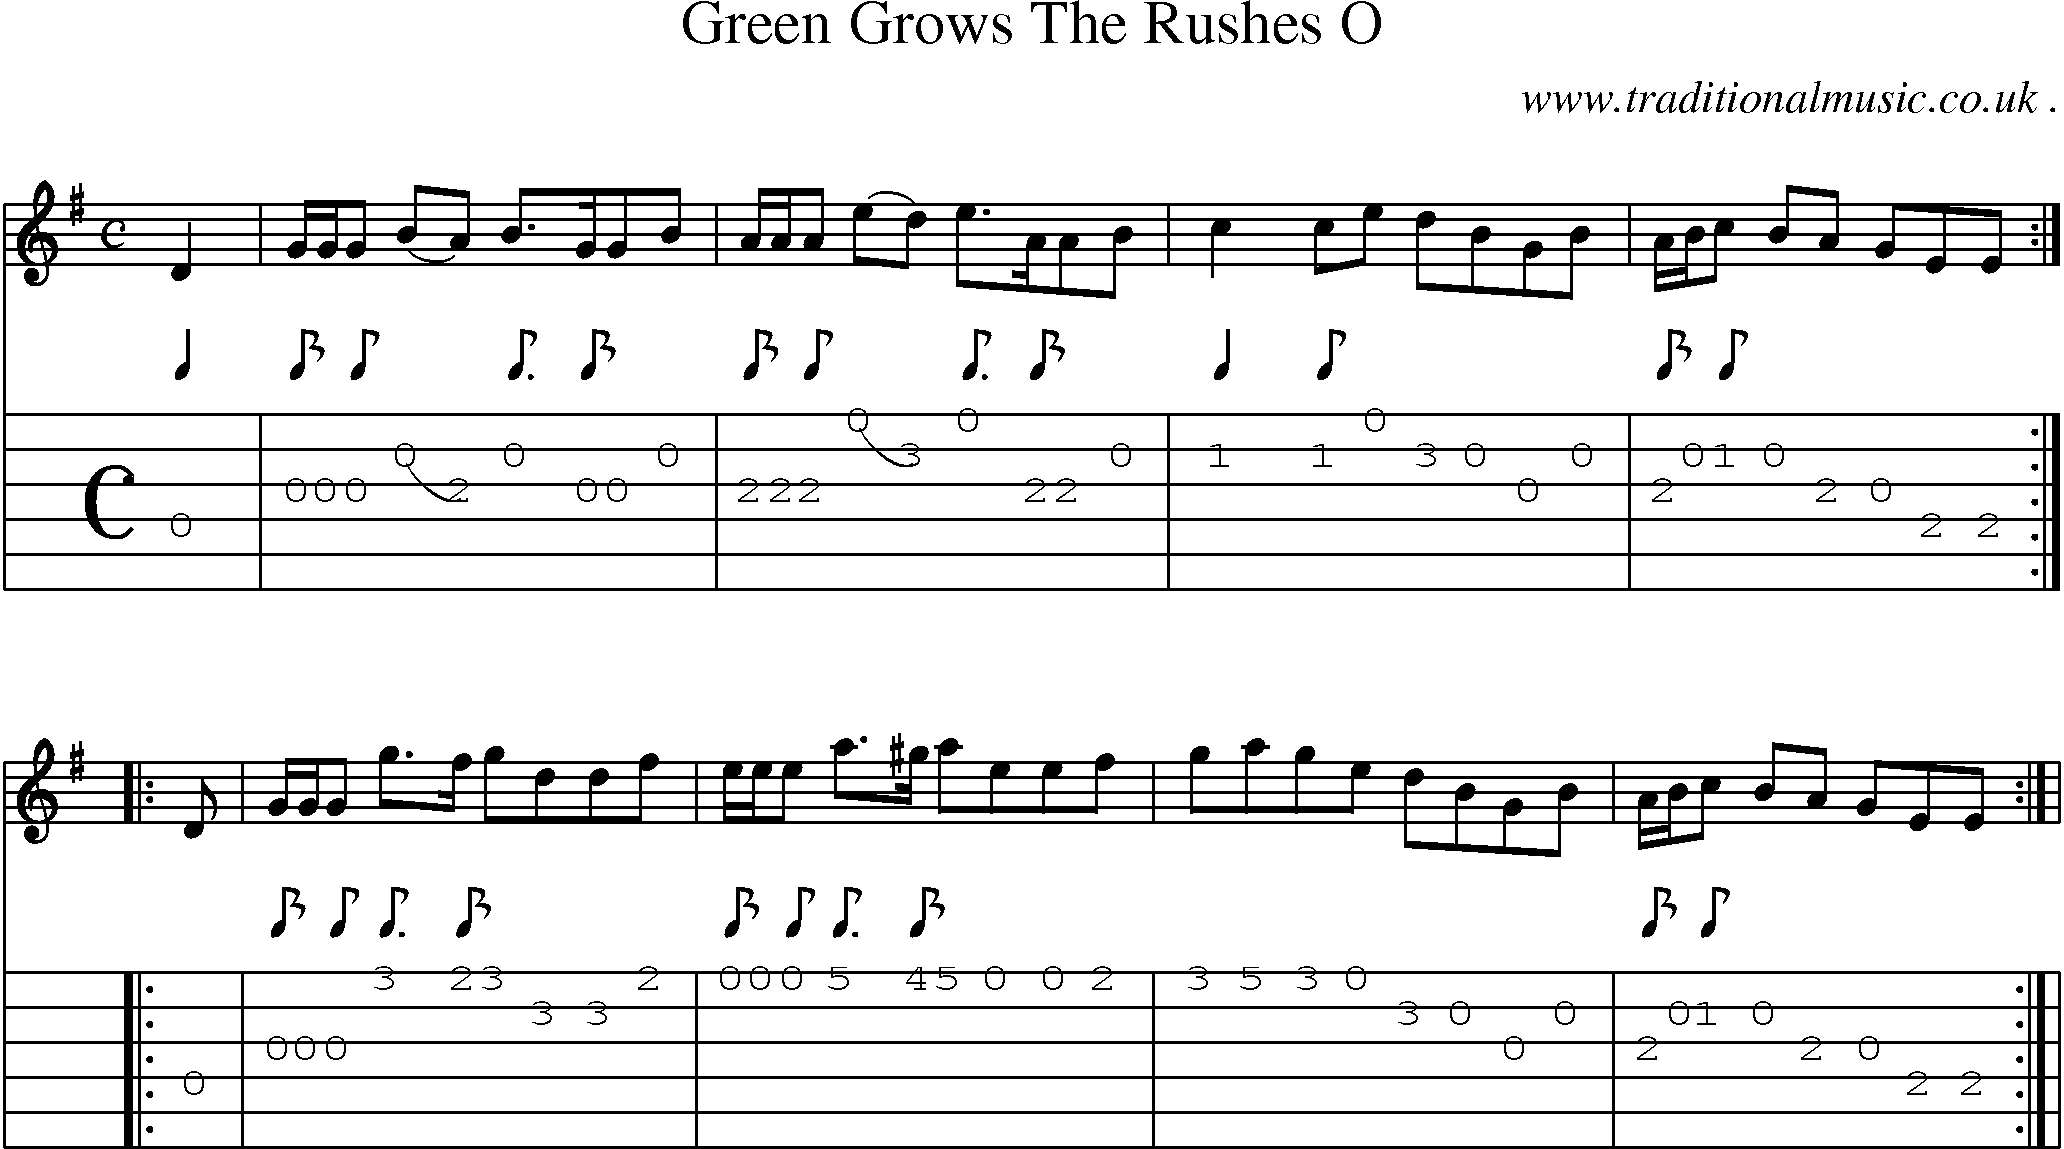 Sheet-Music and Guitar Tabs for Green Grows The Rushes O